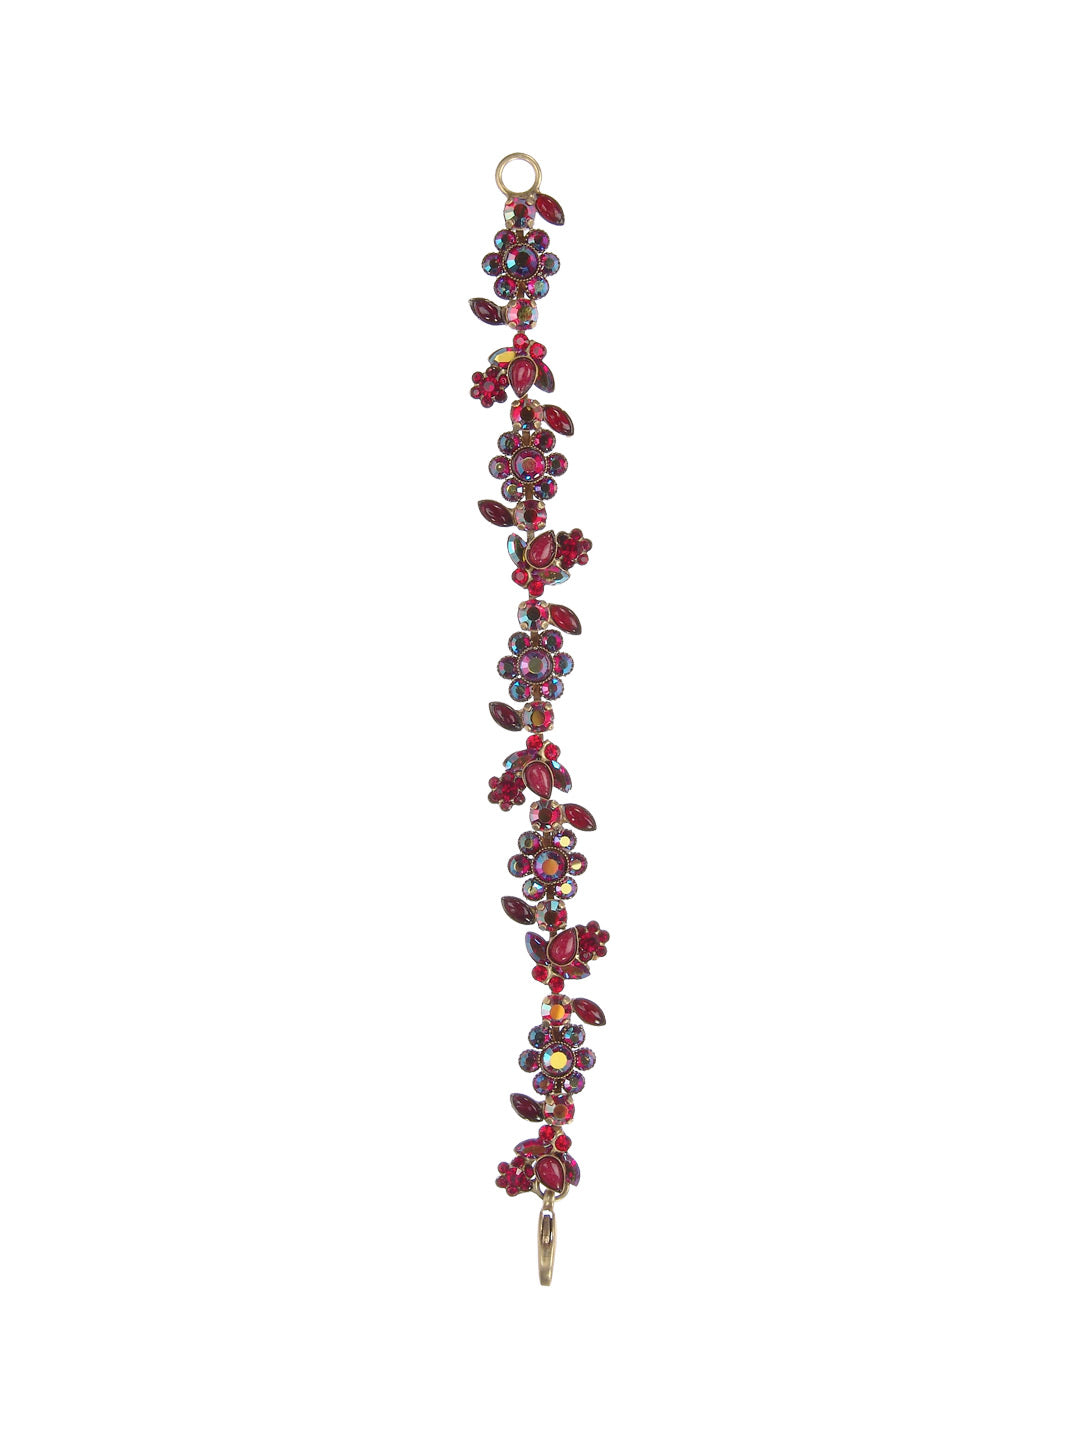 Crystal Flower Classic Bracelet - BBJ31AGCB -  From Sorrelli's Cranberry collection in our Antique Gold-tone finish.